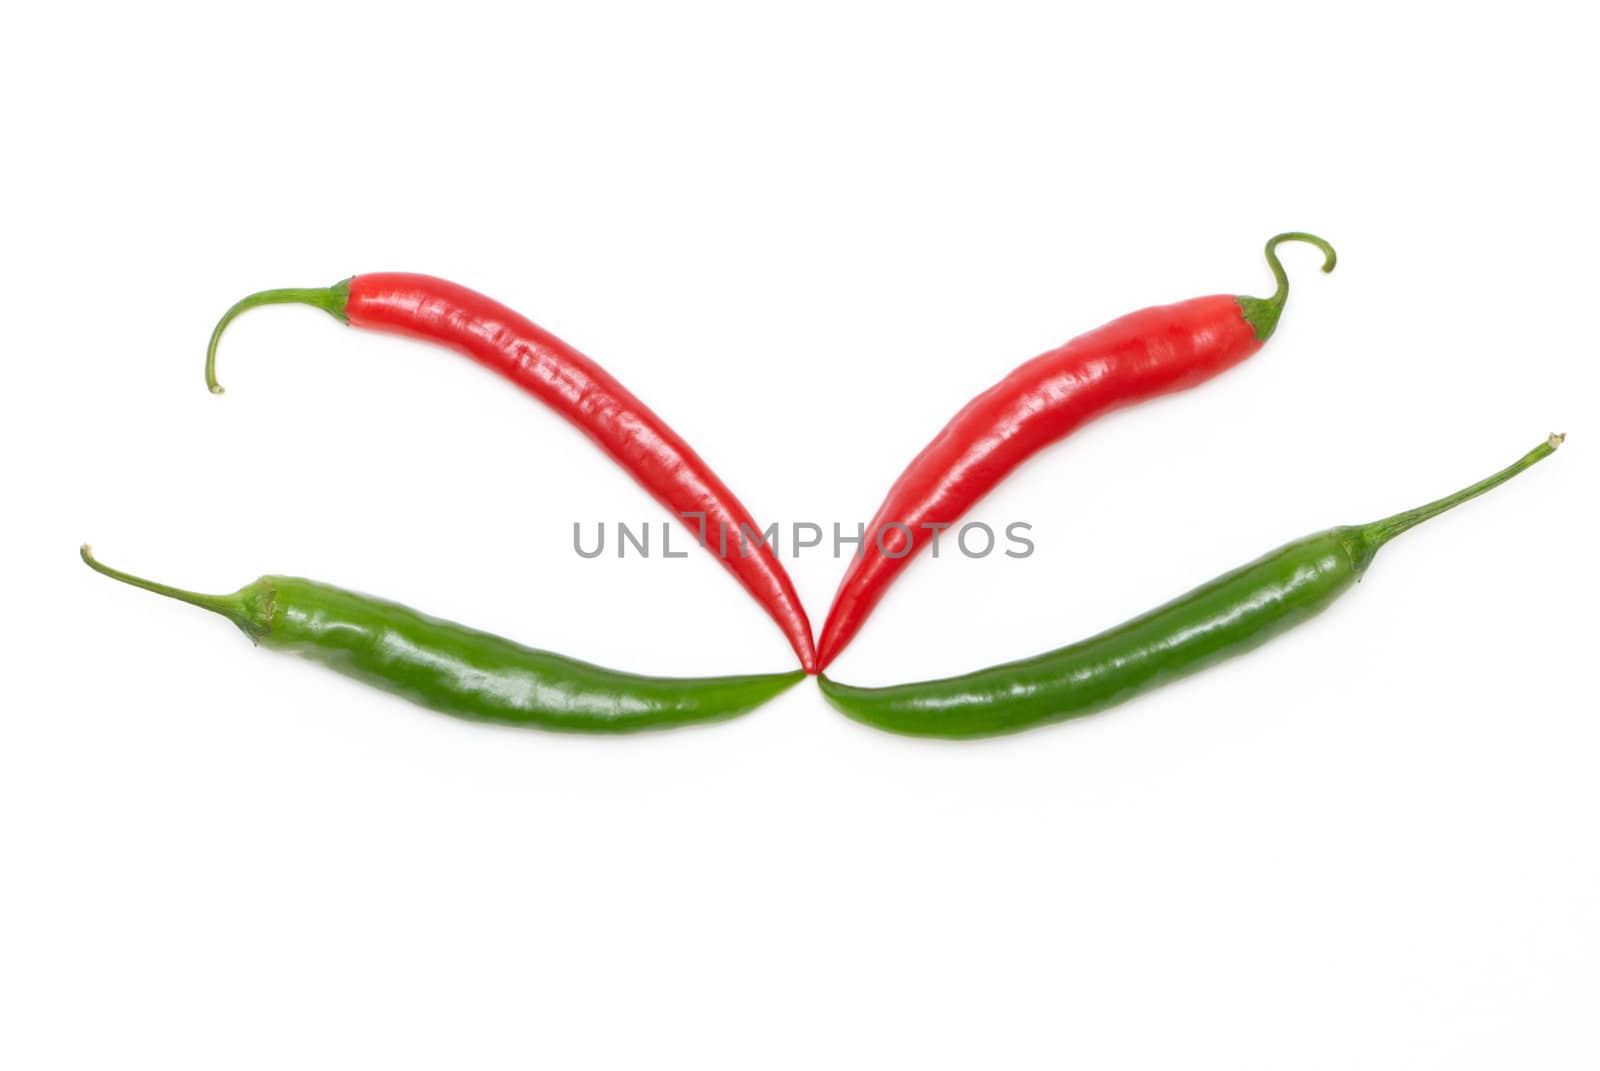 Red and green chili peppers by Olinkau